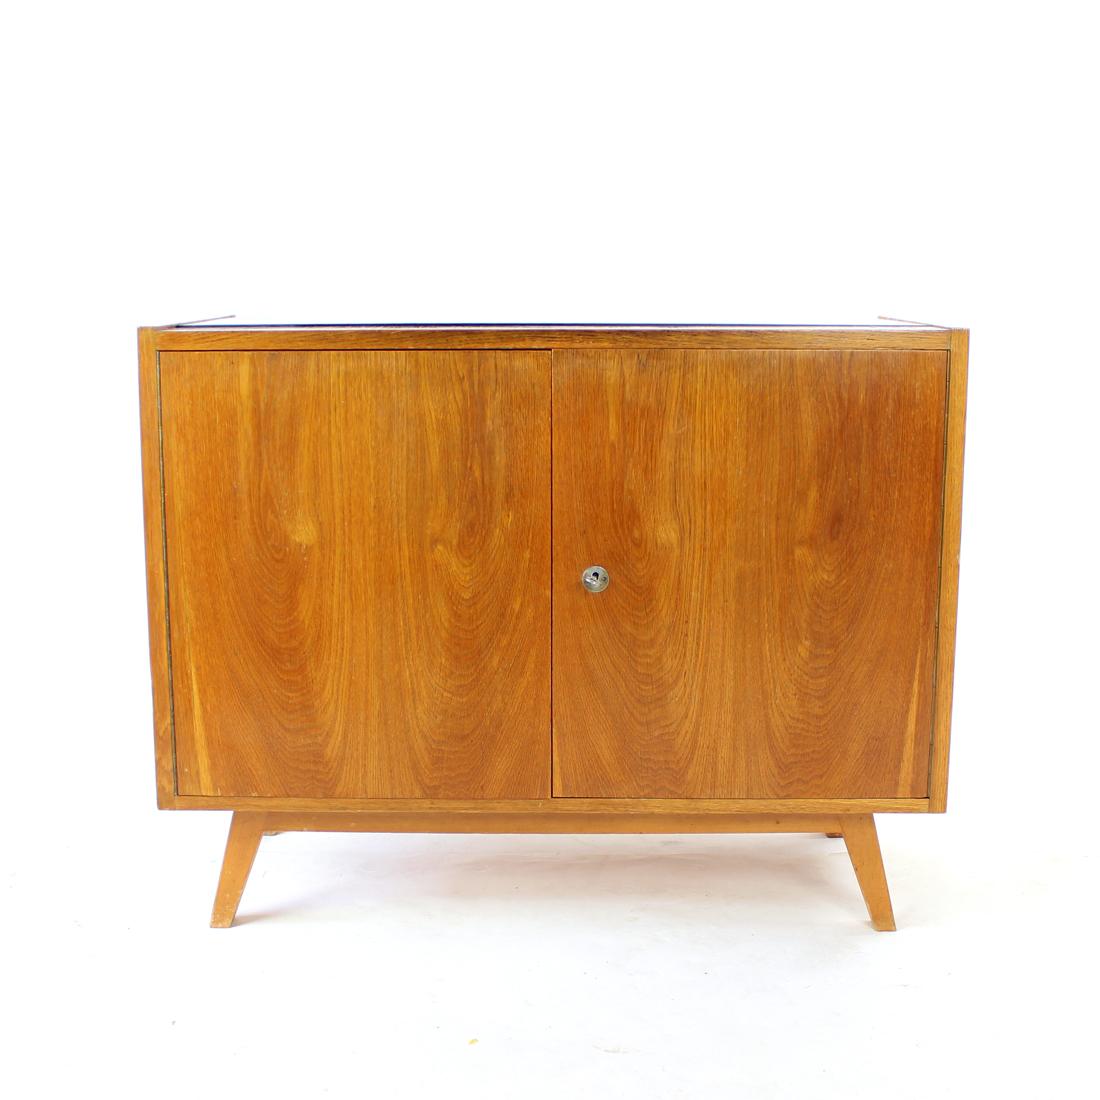 Mid-century sideboard in elegant finish. Produced in Czechoslovakia in 1960s, the sideboard is made of oak wood construction with beautiful veneer. The sideboard has two doors working on piano hindges. The lock is original and works without a